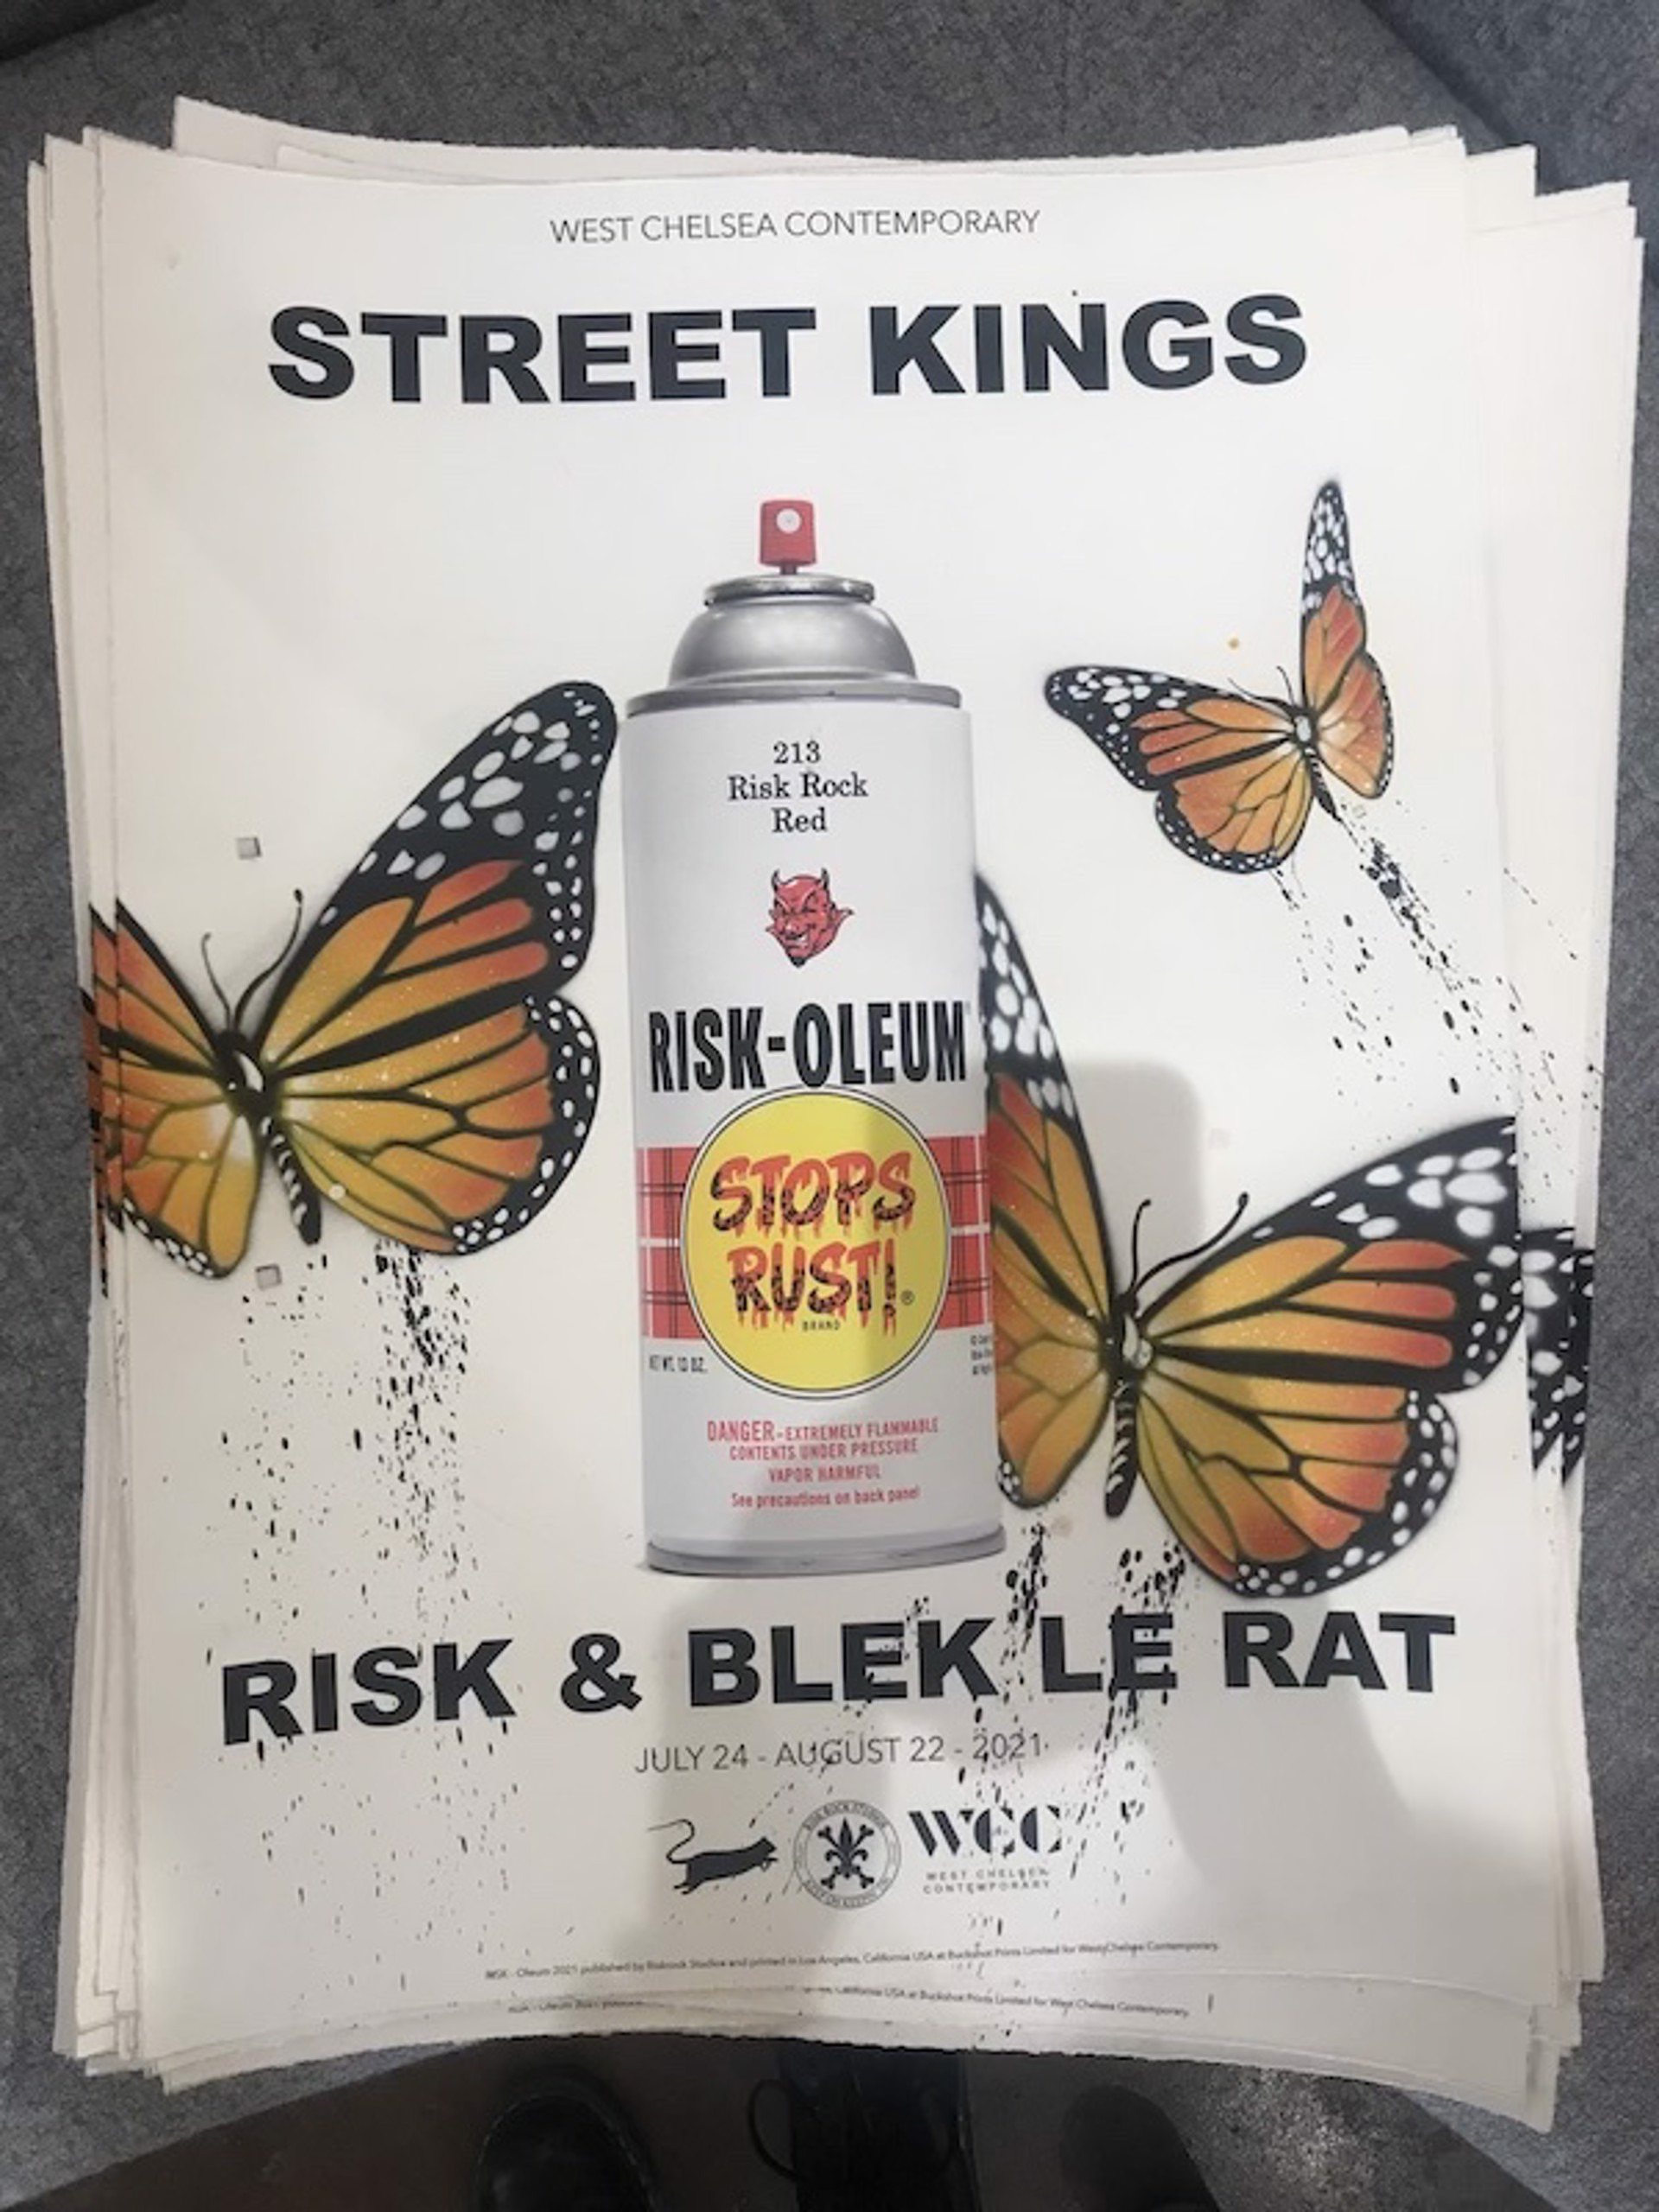 Street Kings Show Print (37/50) by Risk